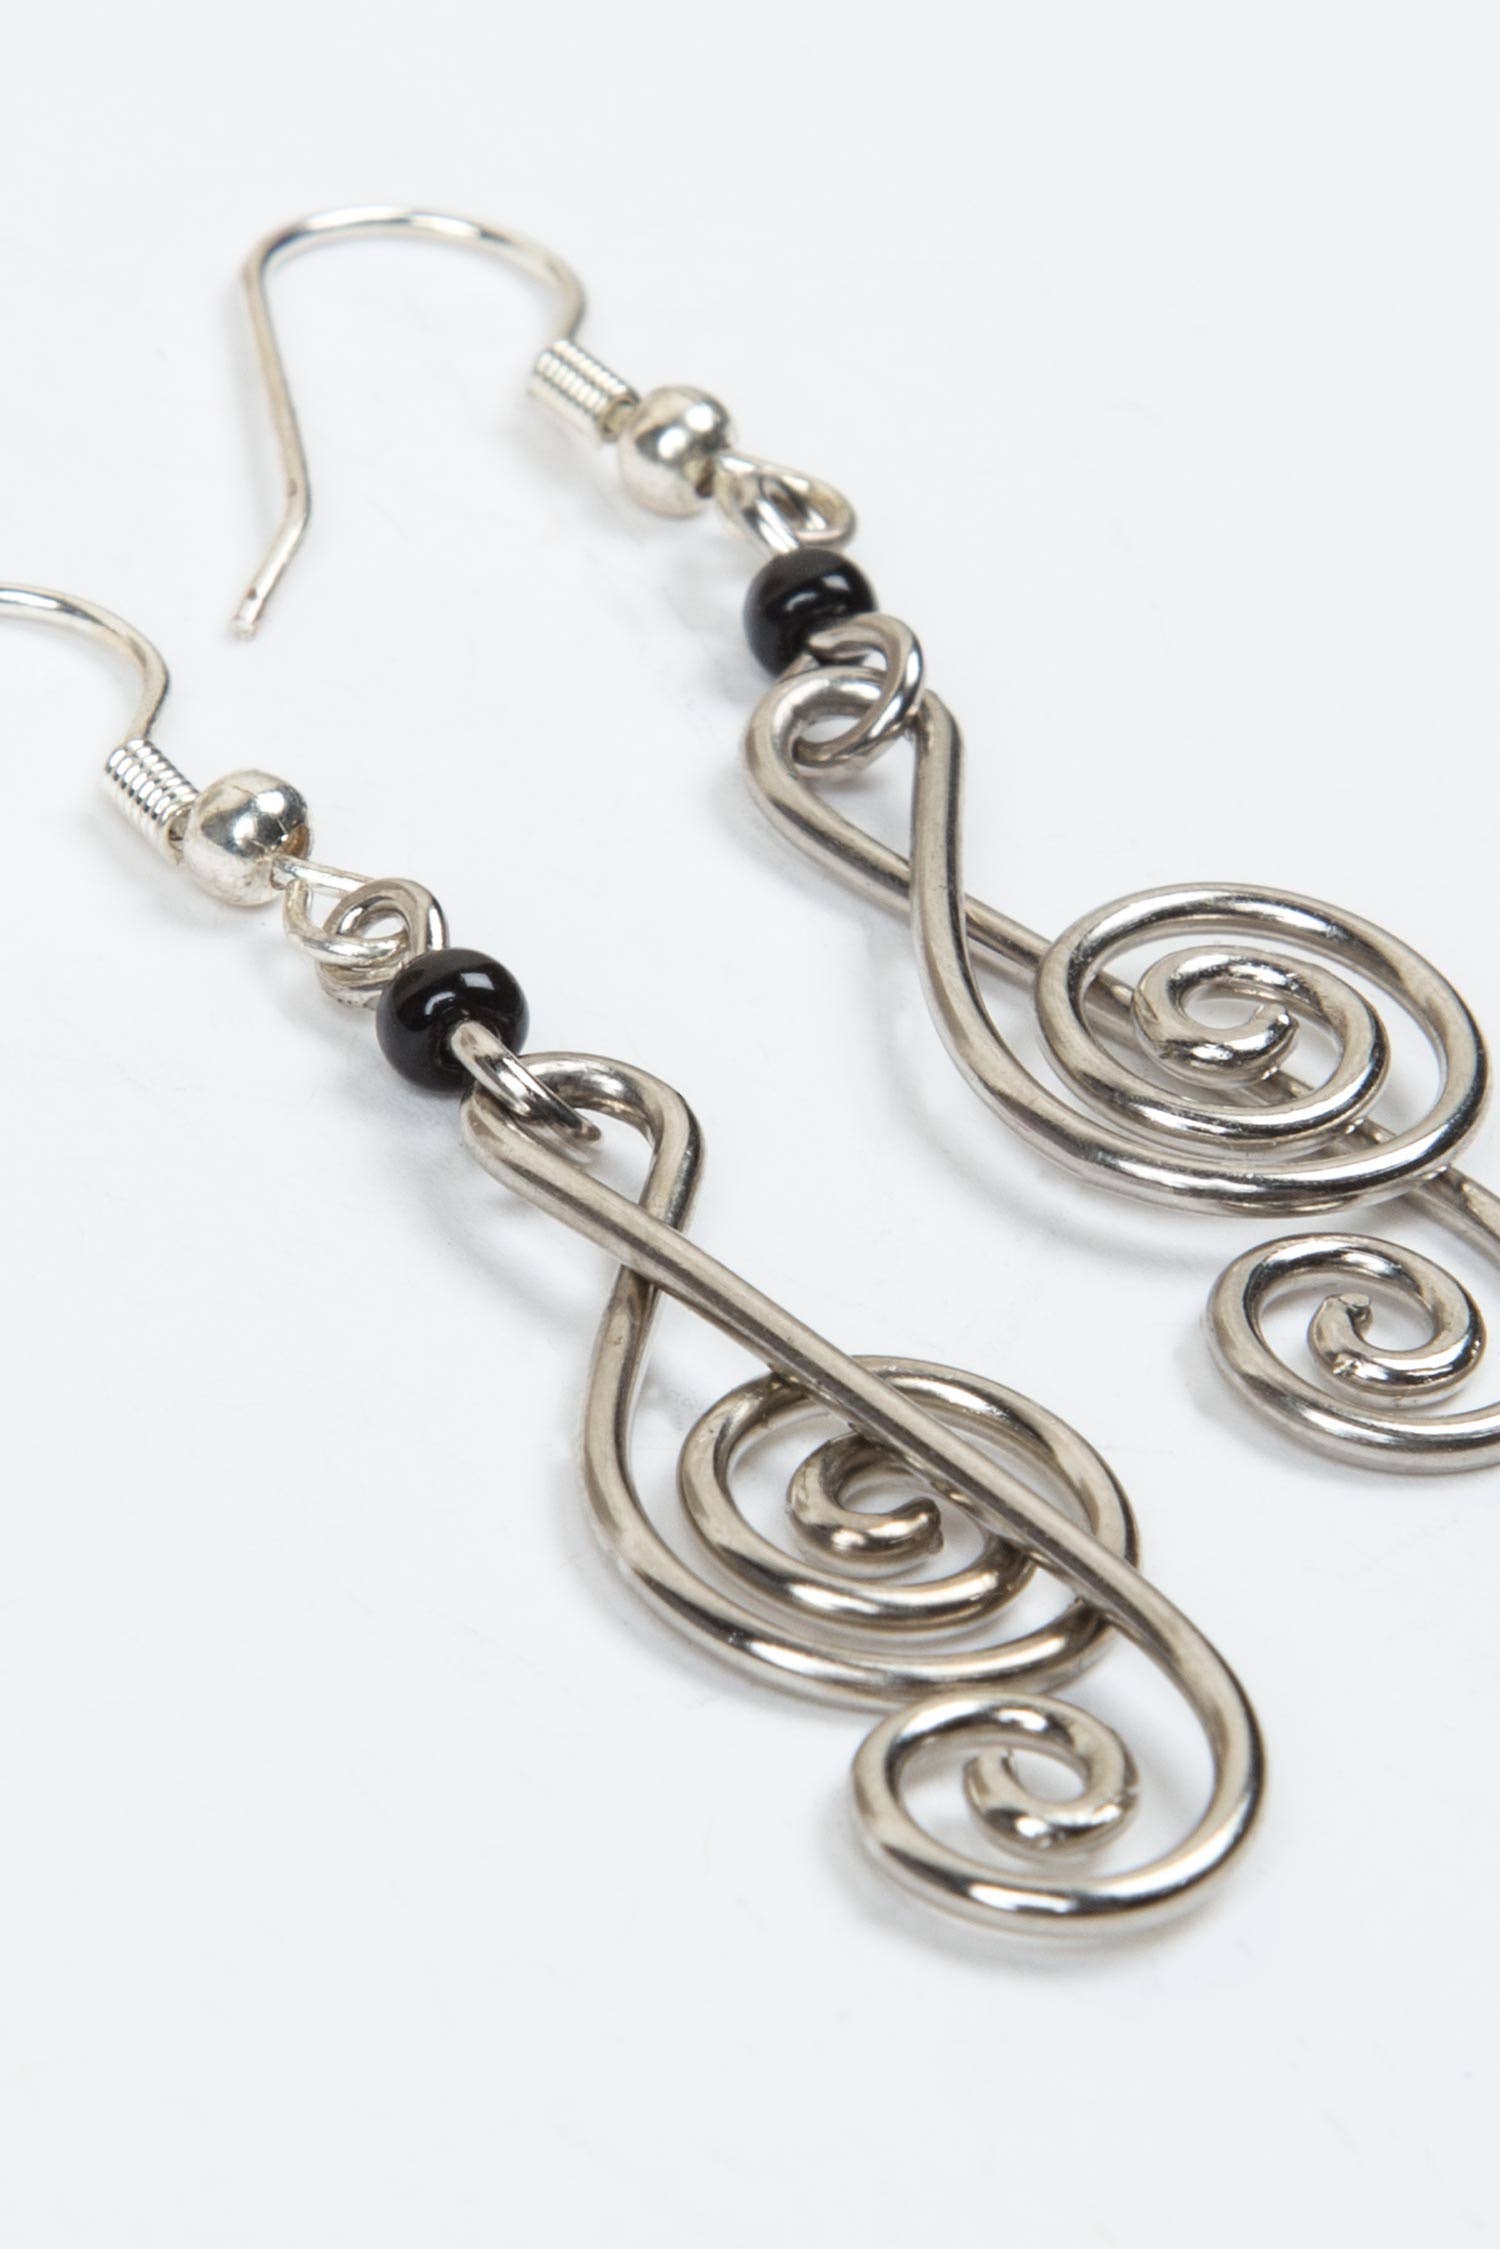 Ten Thousand Villages - Music Theory Earrings